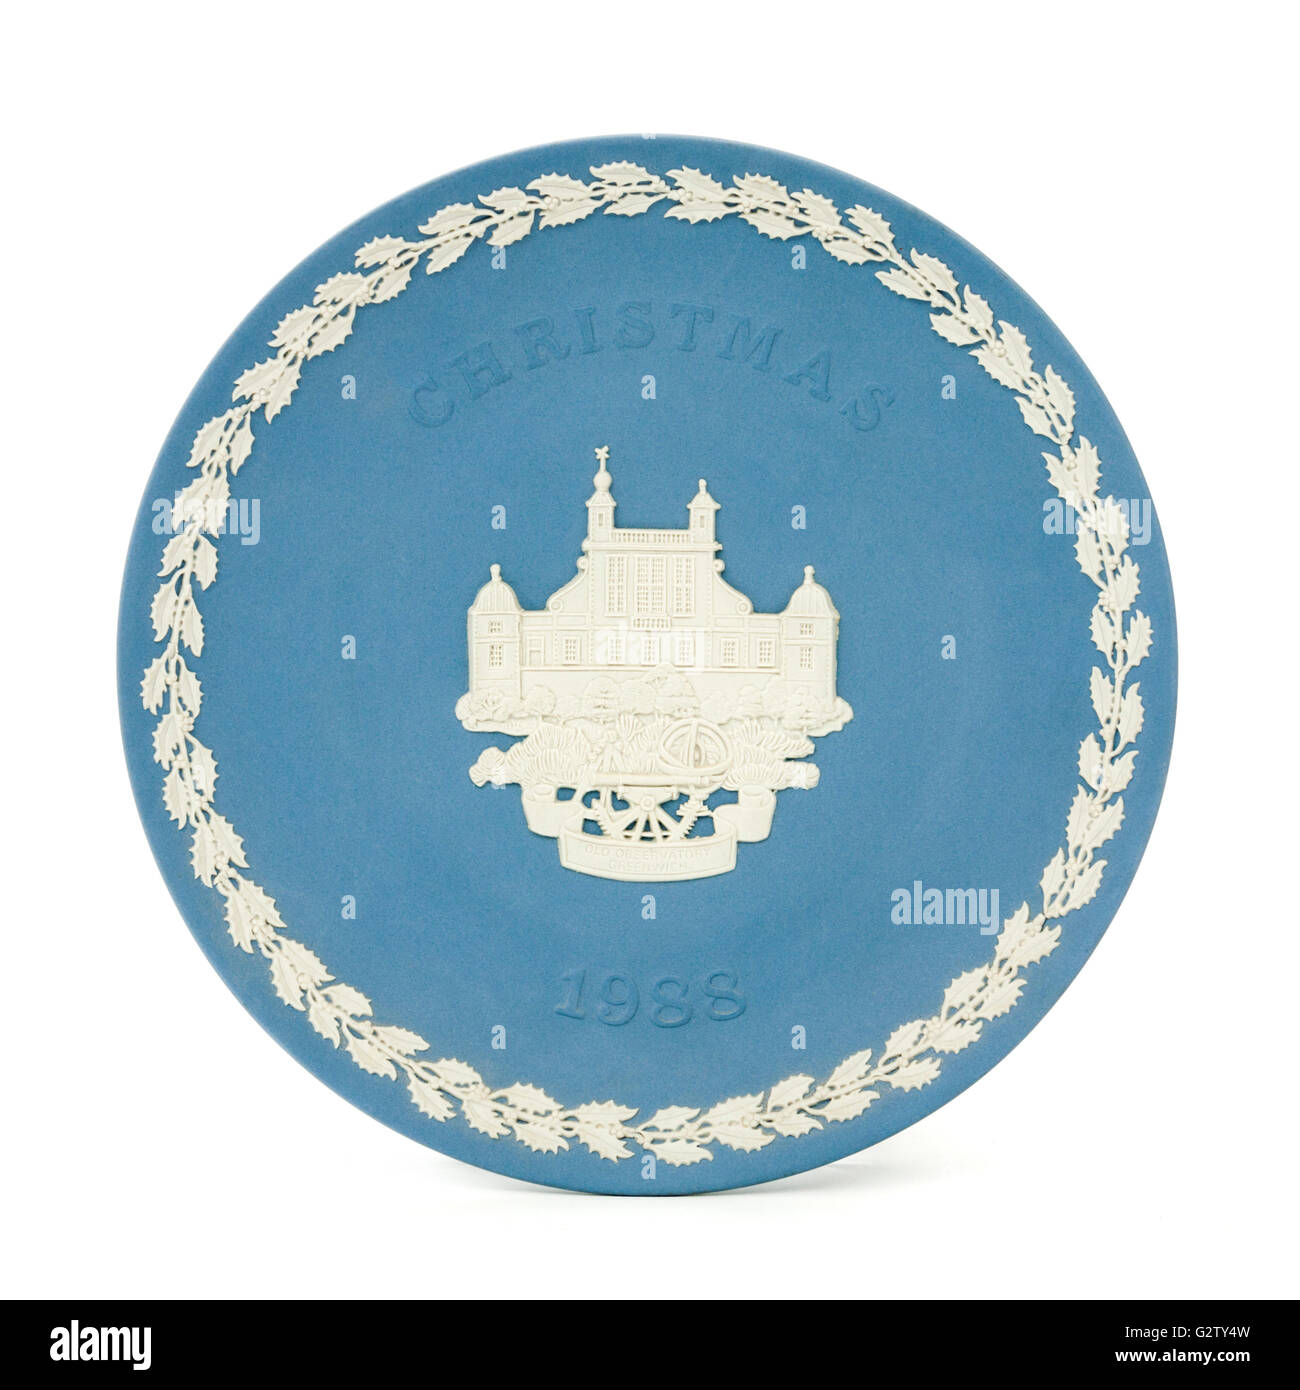 Wedwood Blue Jasperware 1988 Christmas Plate with the Old Greenwich Royal Observatory on the front Stock Photo